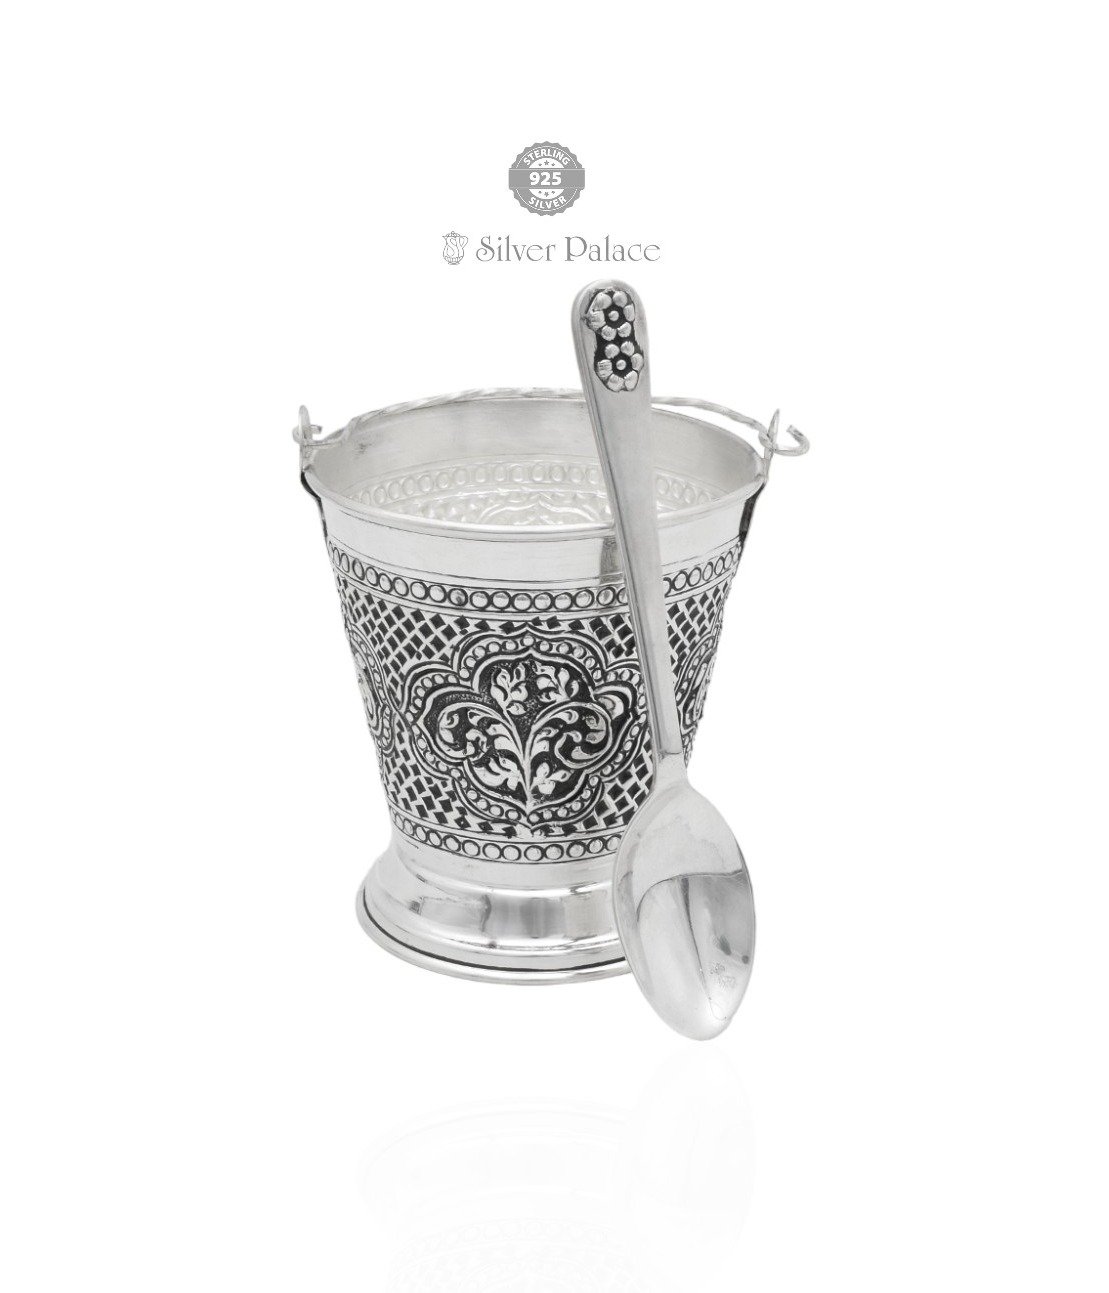  92.5 OXIDISED SILVER  BUCKET  WITH SPOON FOR POOJA 